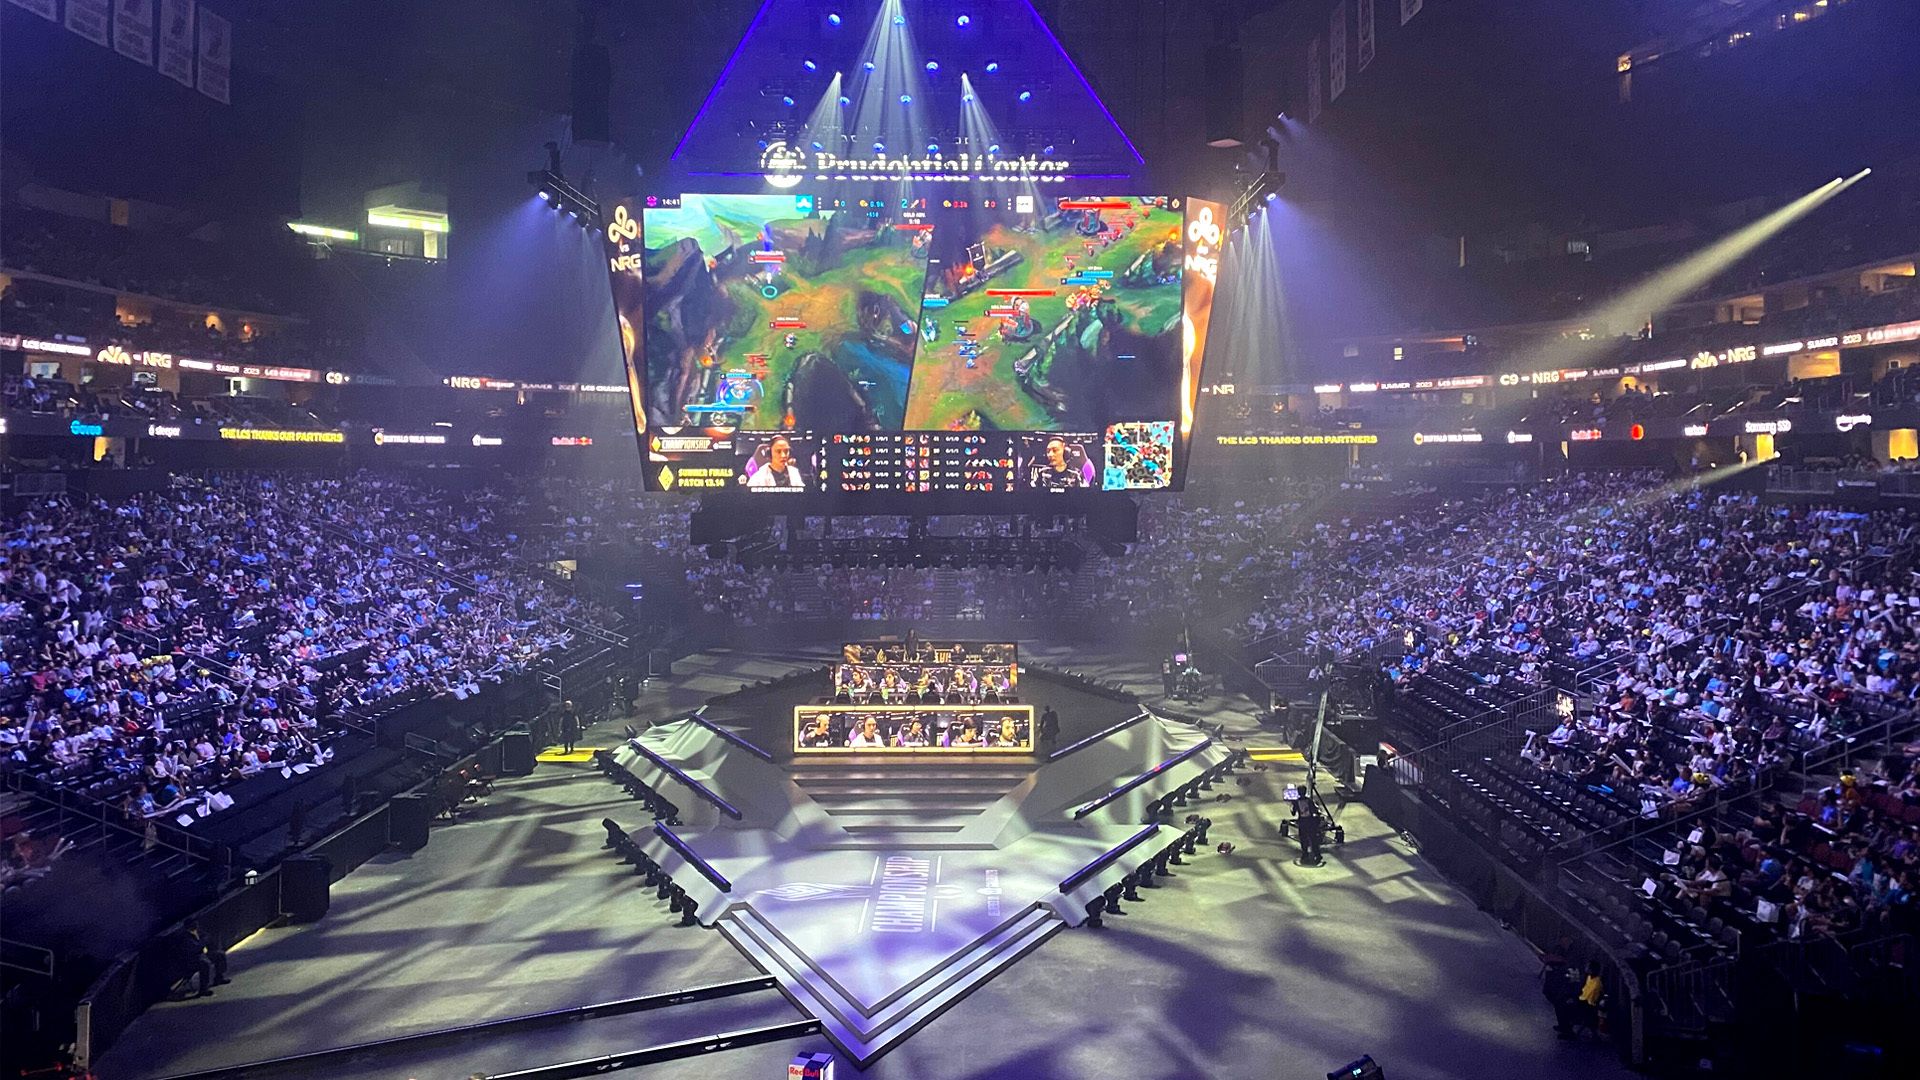 Photo of an arena half-full of people watching a League of Legends match projects on a screen above the teams playing it